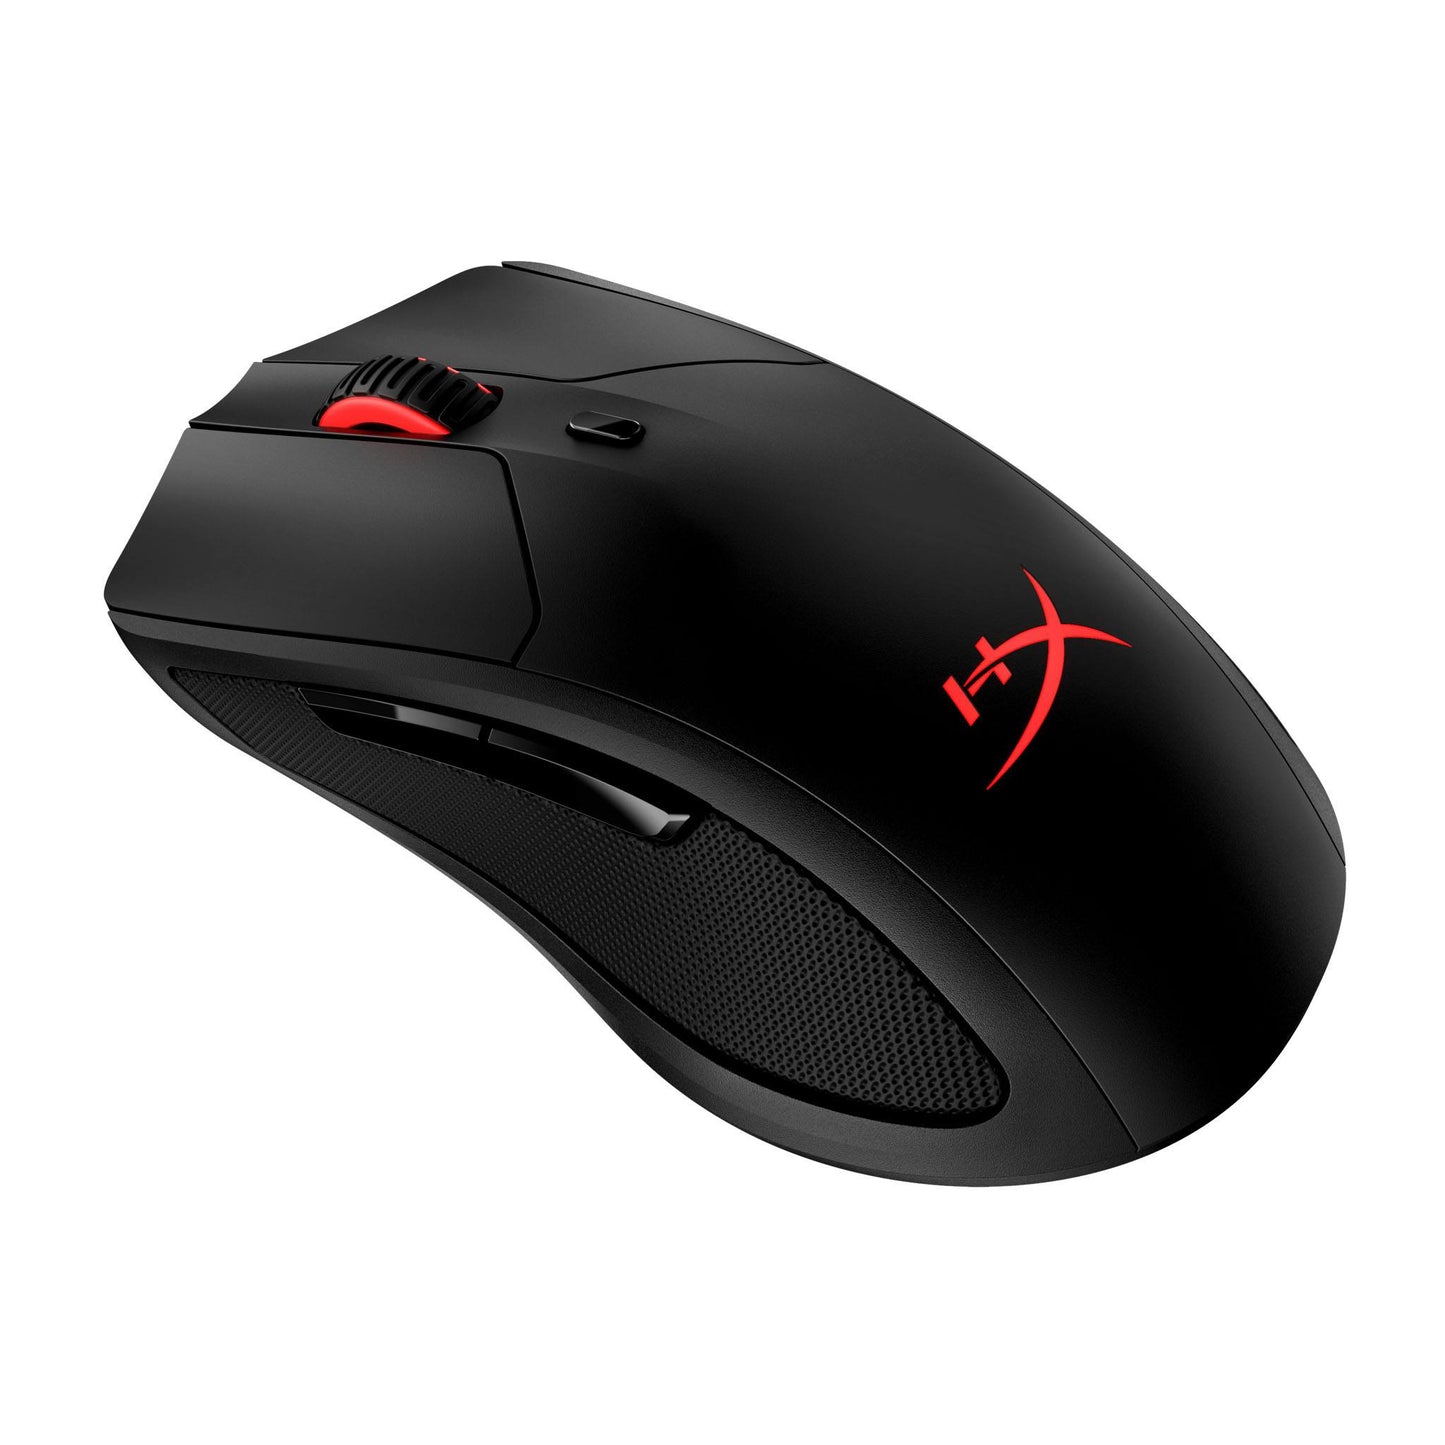 HyperX Pulsefire Dart Wireless RGB Gaming Mouse Ergonomic  with Pixart 3389 Optical Sensor, 16000 DPI, 6 Programmable Buttons, Qi-Charging 50 Hours Battery Life For PC PS5 PS4 Xbox One (HX-MC006B)